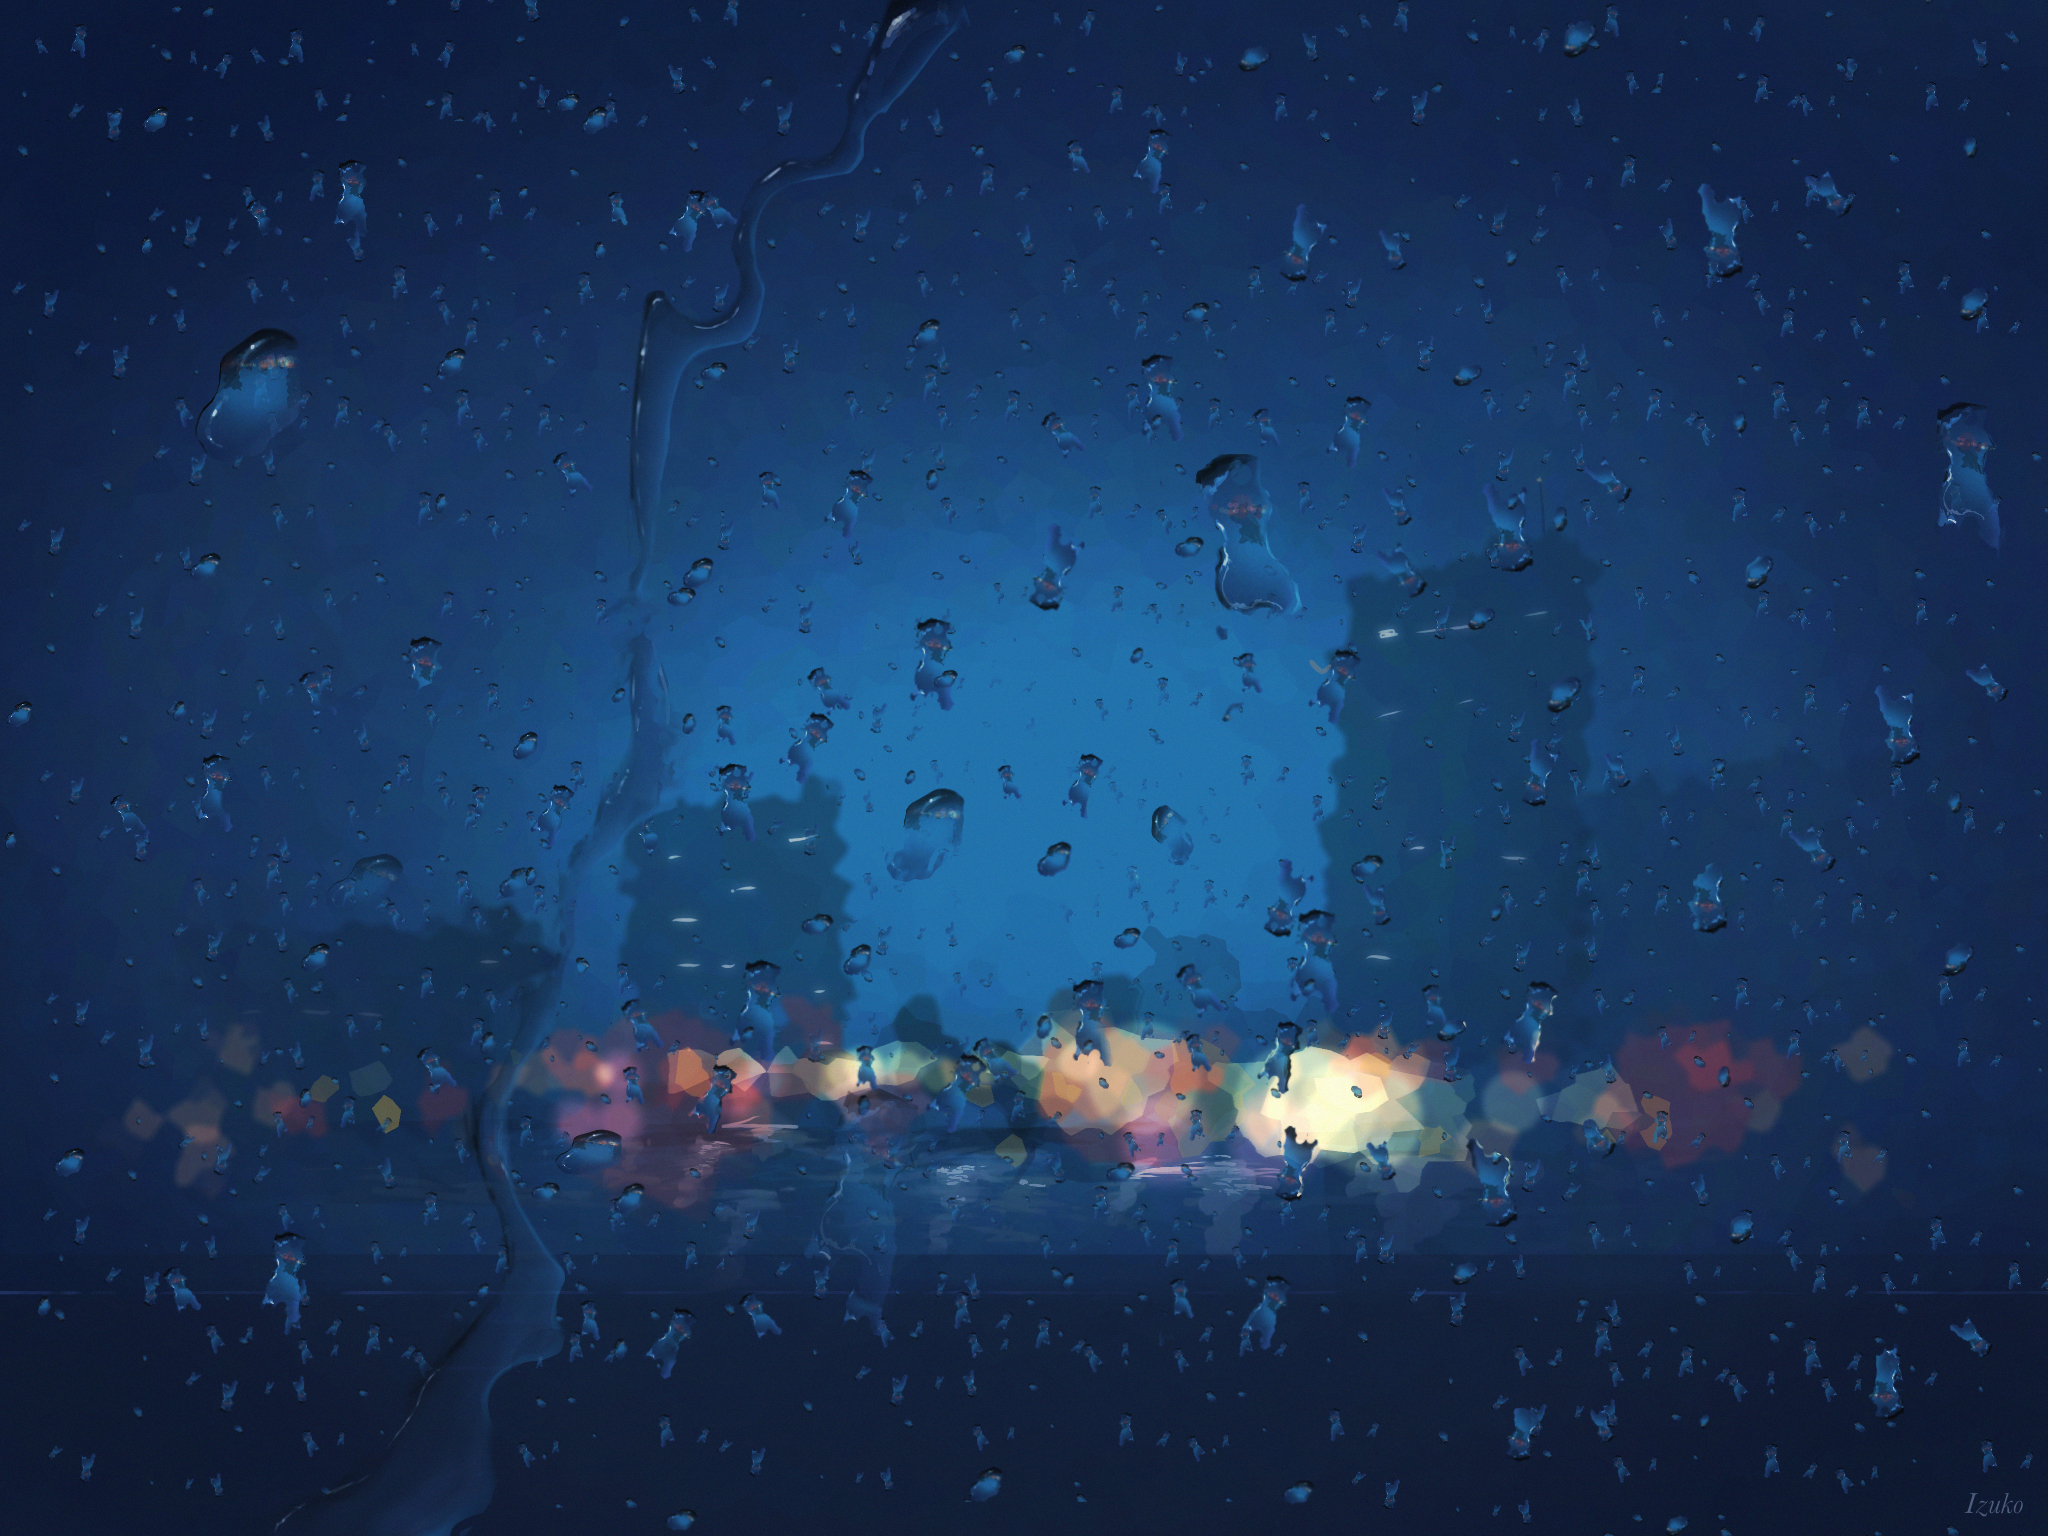 Anime Rain Background Images HD Pictures and Wallpaper For Free Download   Pngtree